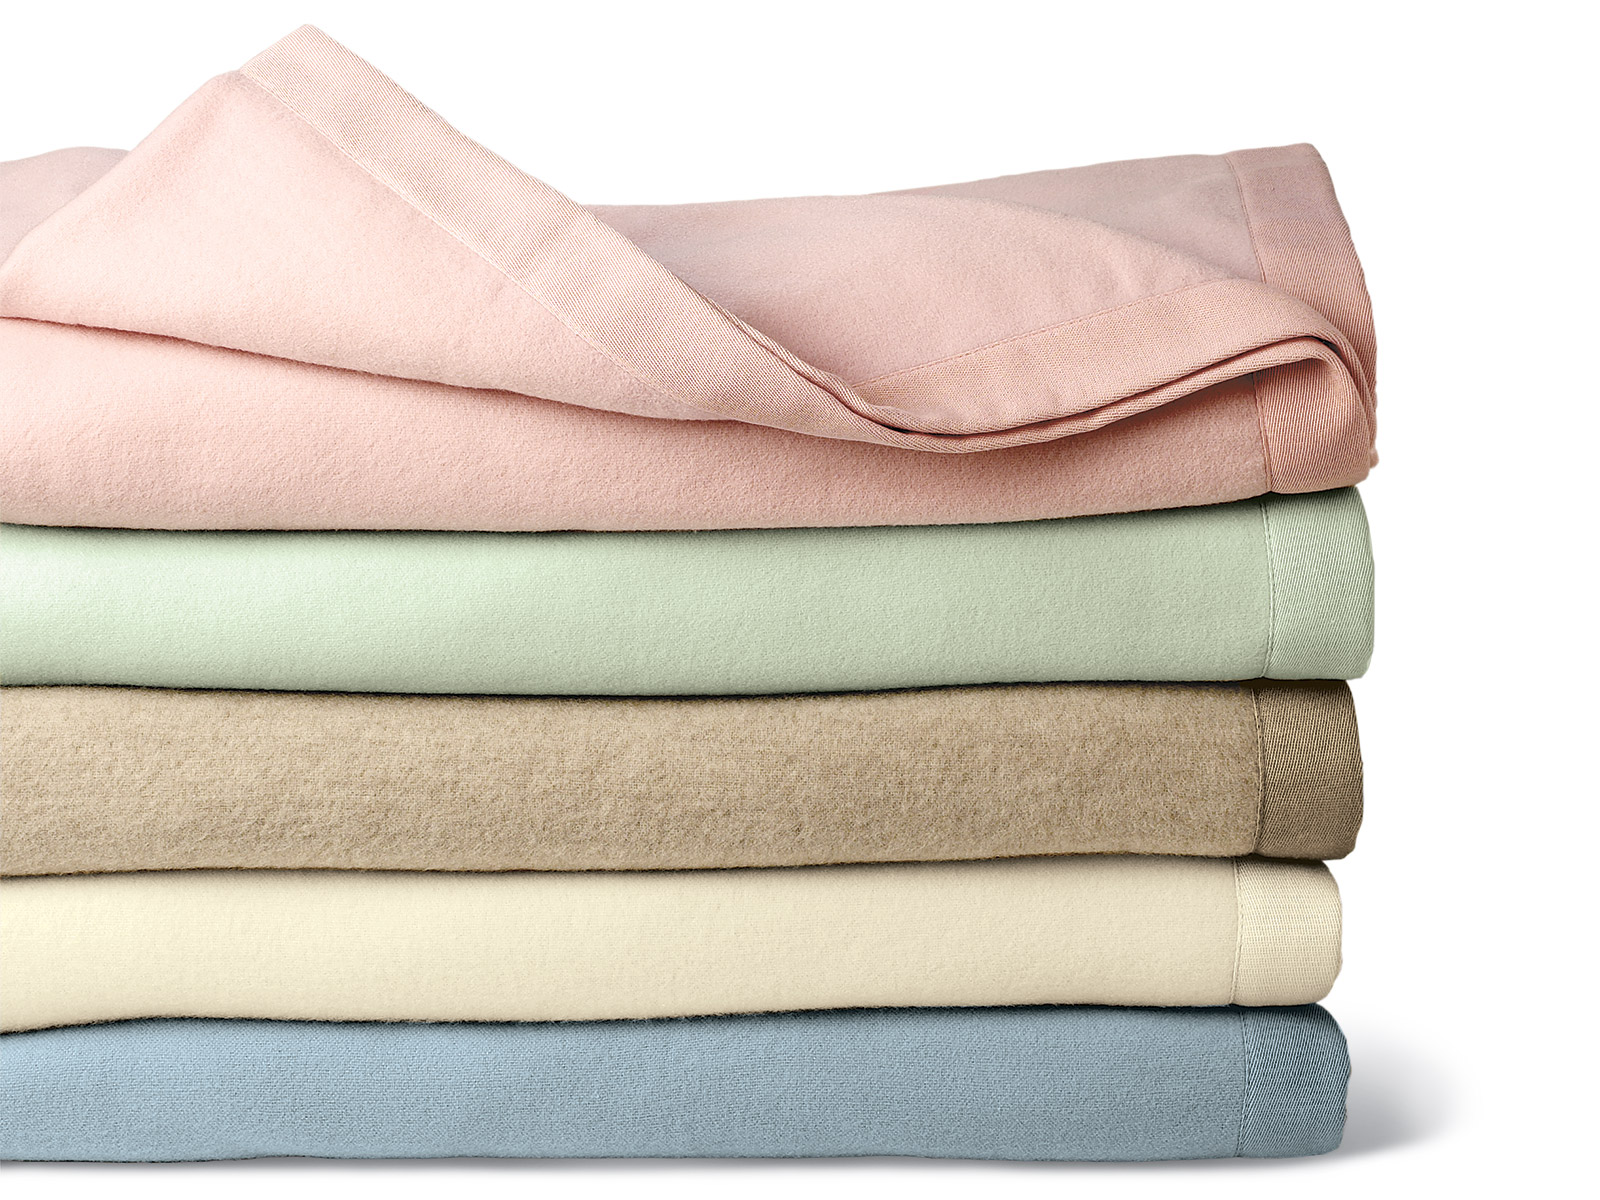 windchime cashmere blanket: pink, green, taupe, winter white. blue puojrdl